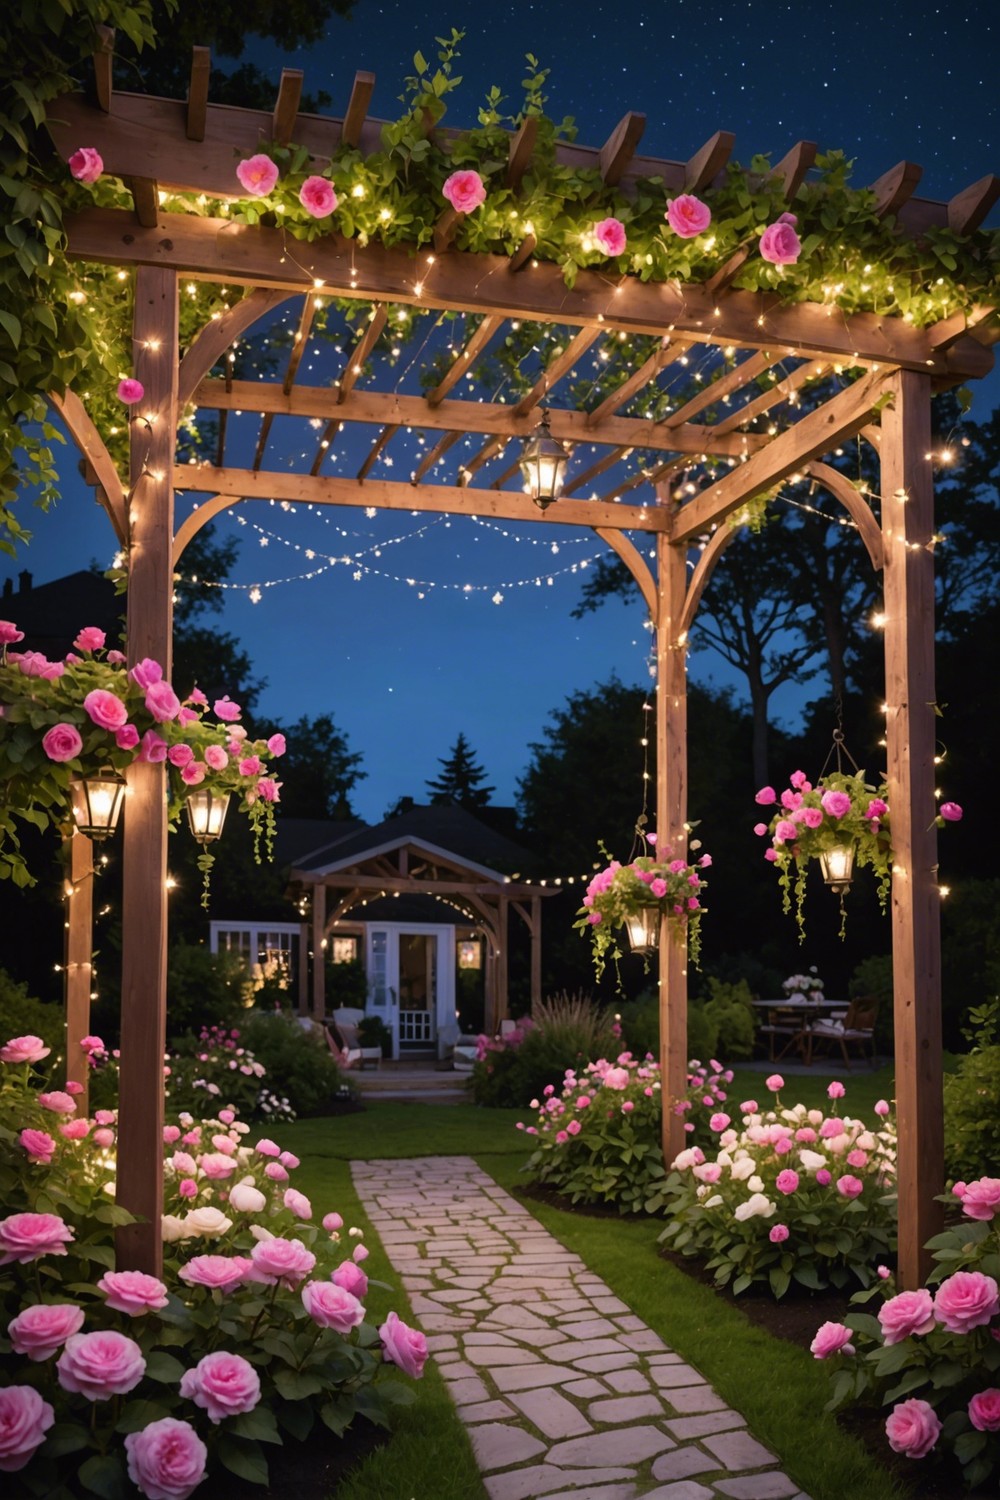 Whimsical Pergola with Fairy Lights and Flowers